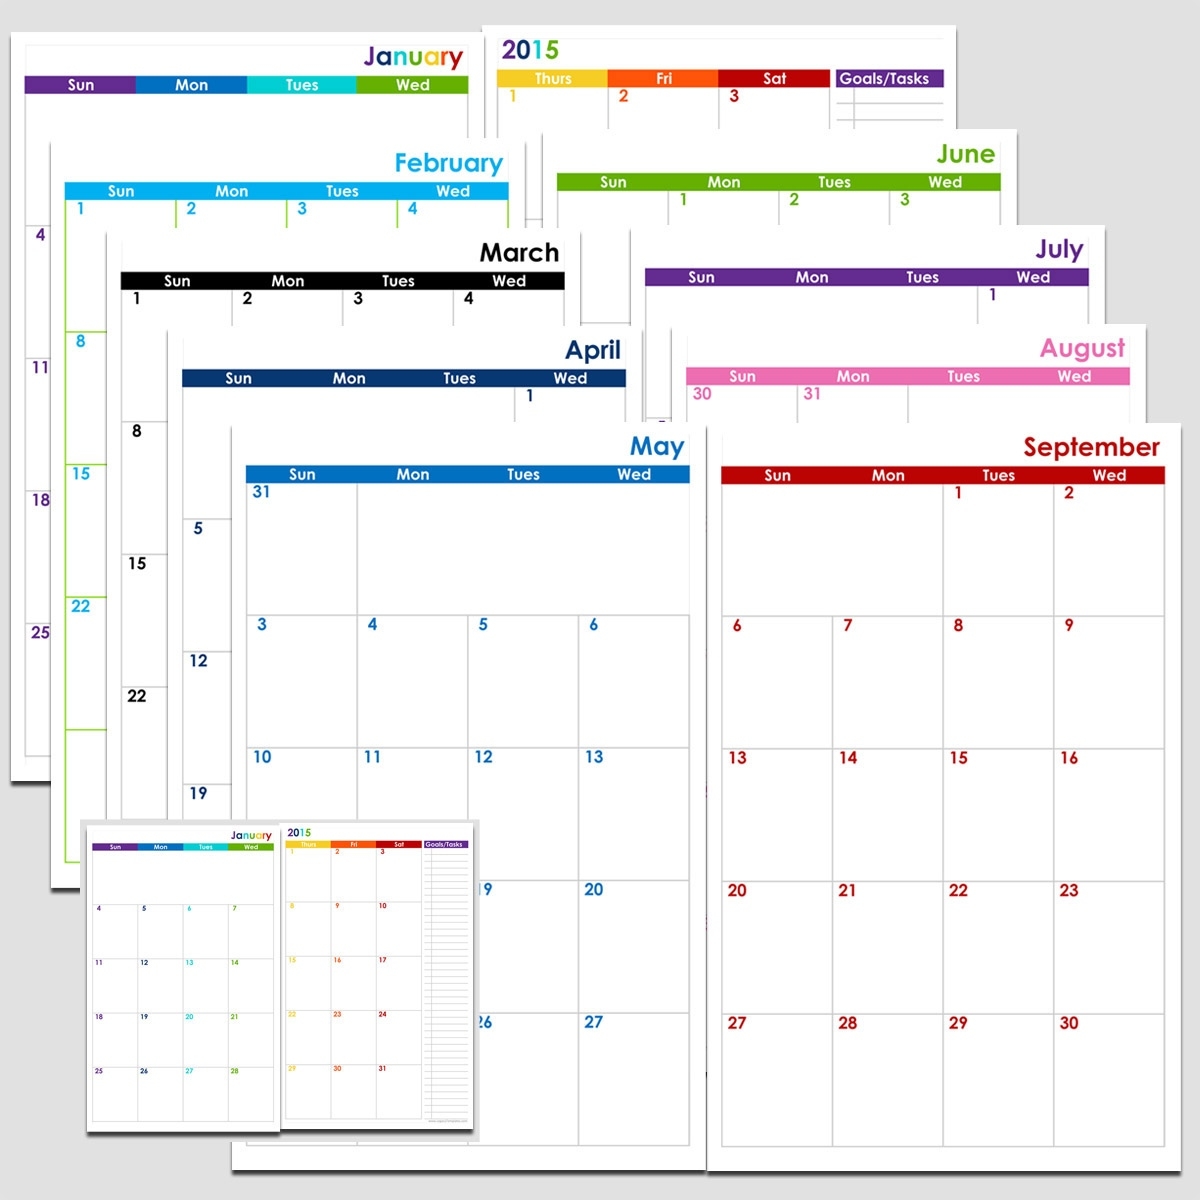 Calendar Two Months Per Page 1 Within 2 Monthly Template - Calendar Calendar Month Per Page